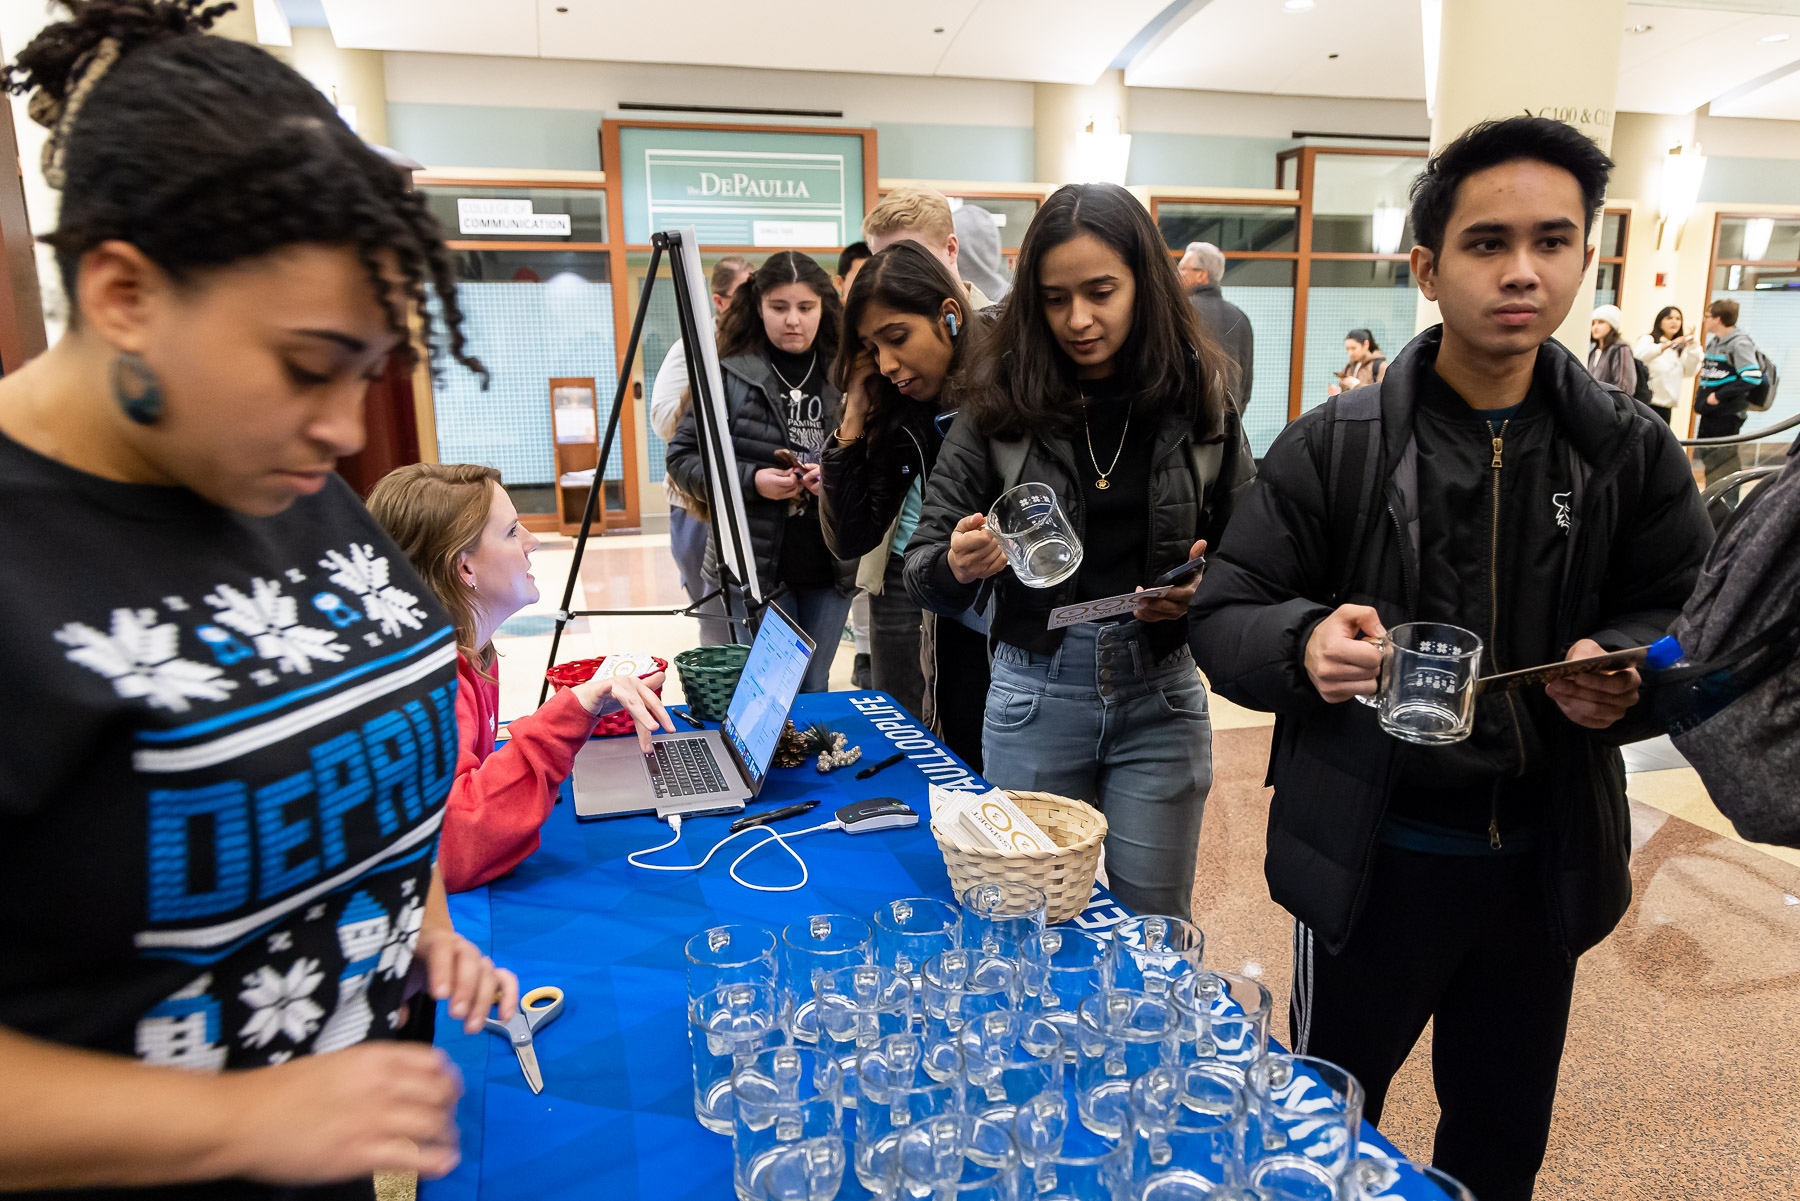 Tuesday also featured the Loop Cookie Stroll. (Photo by Jeff Carrion / DePaul University) 